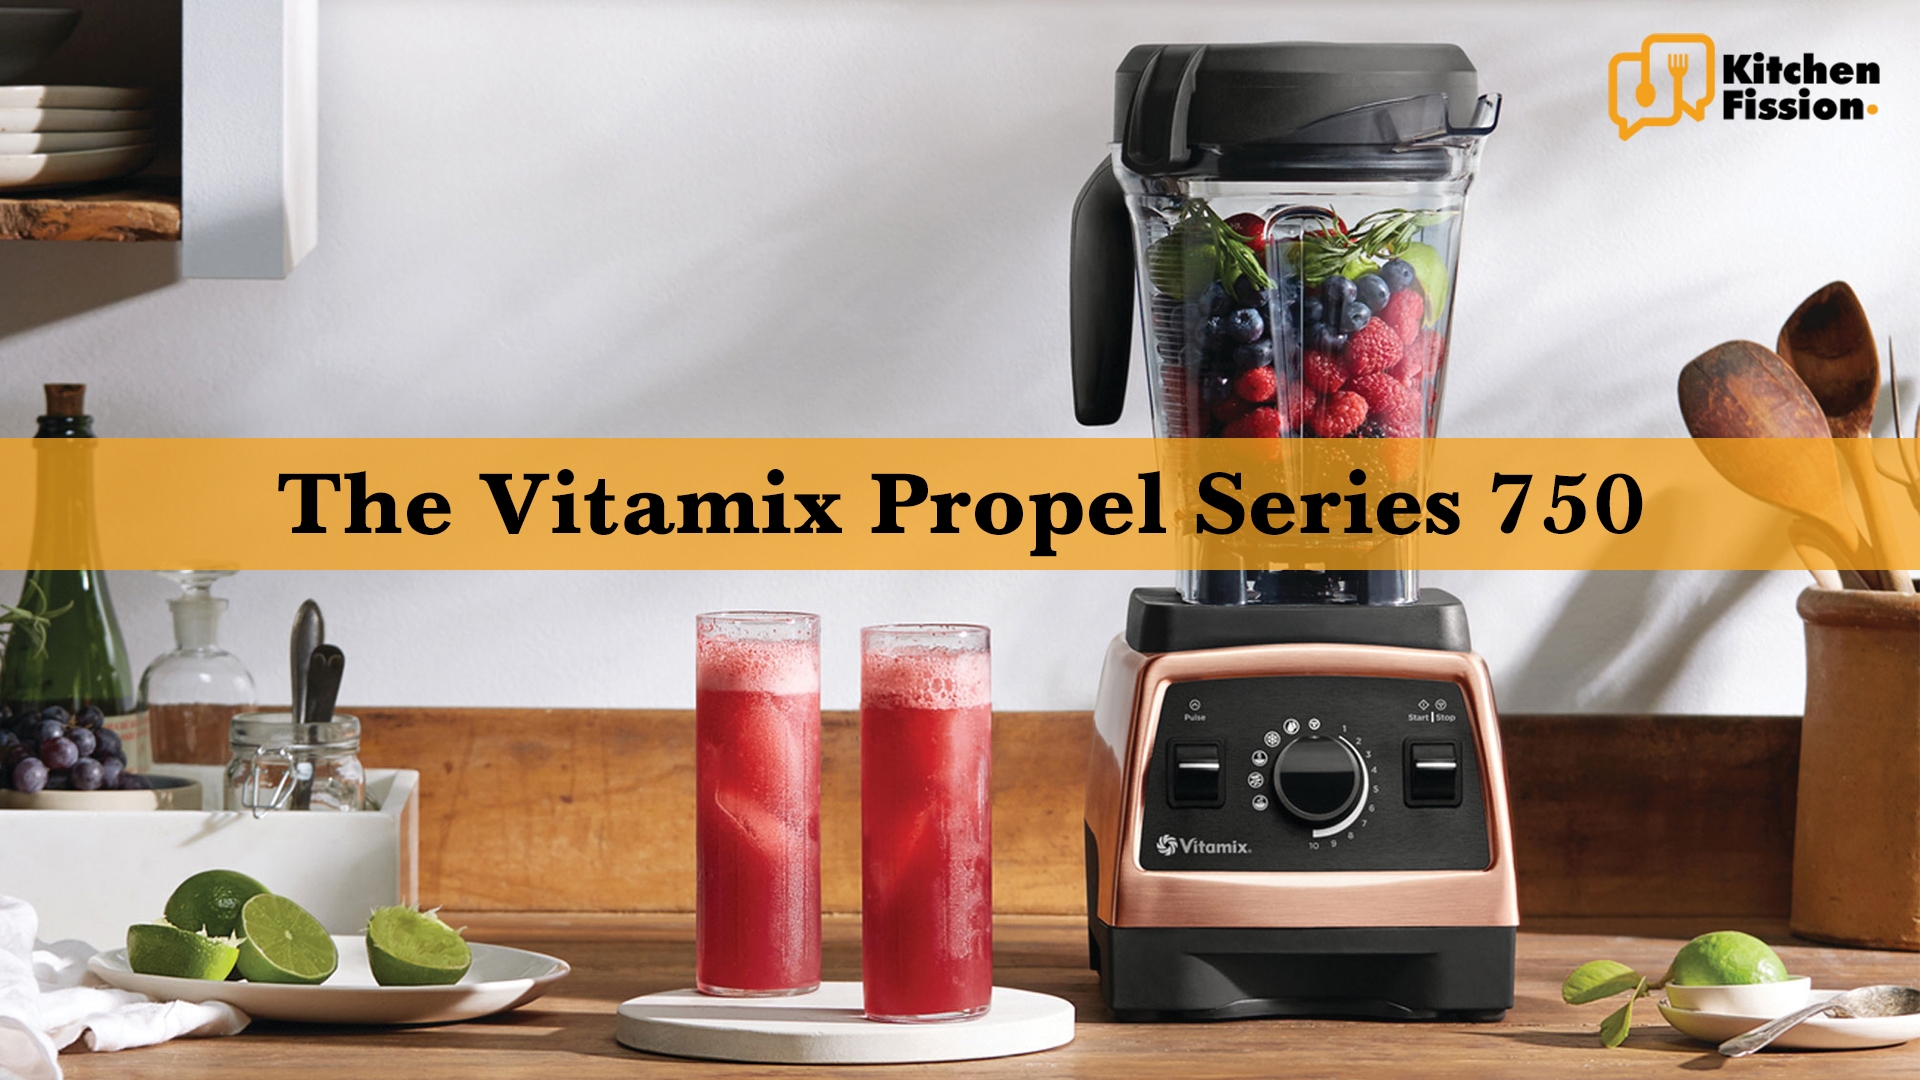 The Vitamix Propel Series 750 Is Everything I Want in a Blender